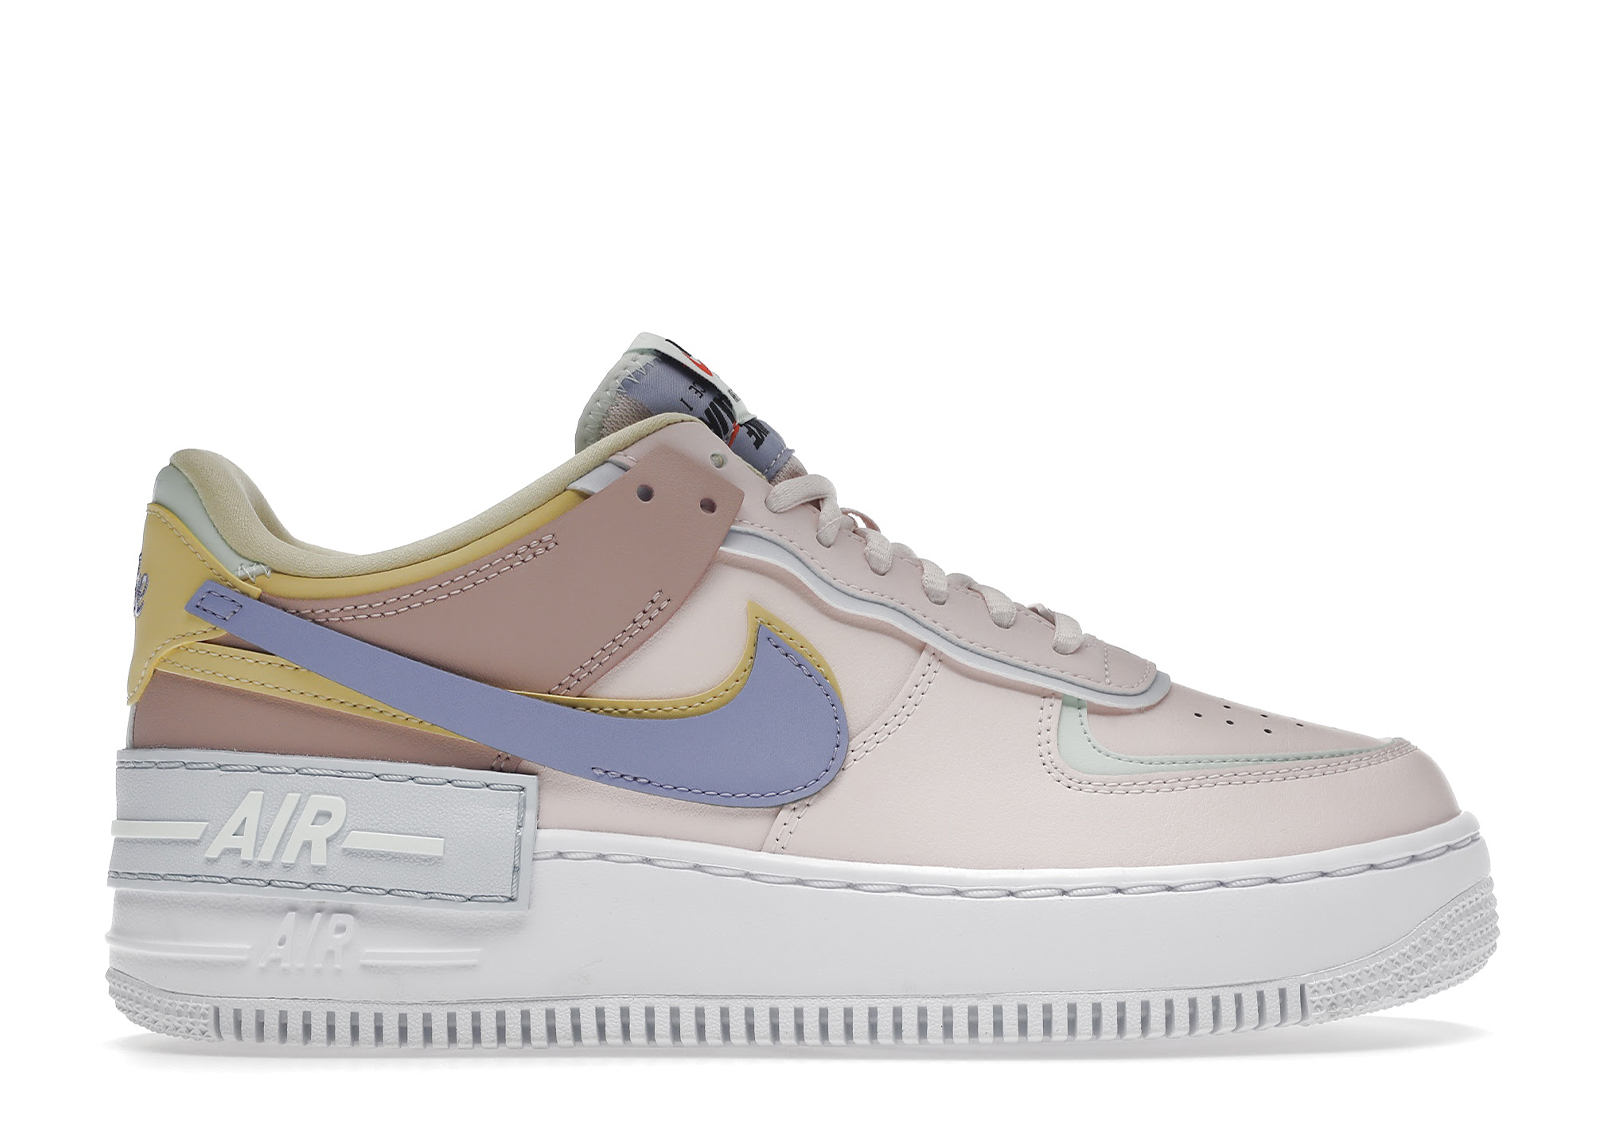 Nike Air Force 1 Low Shadow Light Soft Pink (Women's) - CI0919-600